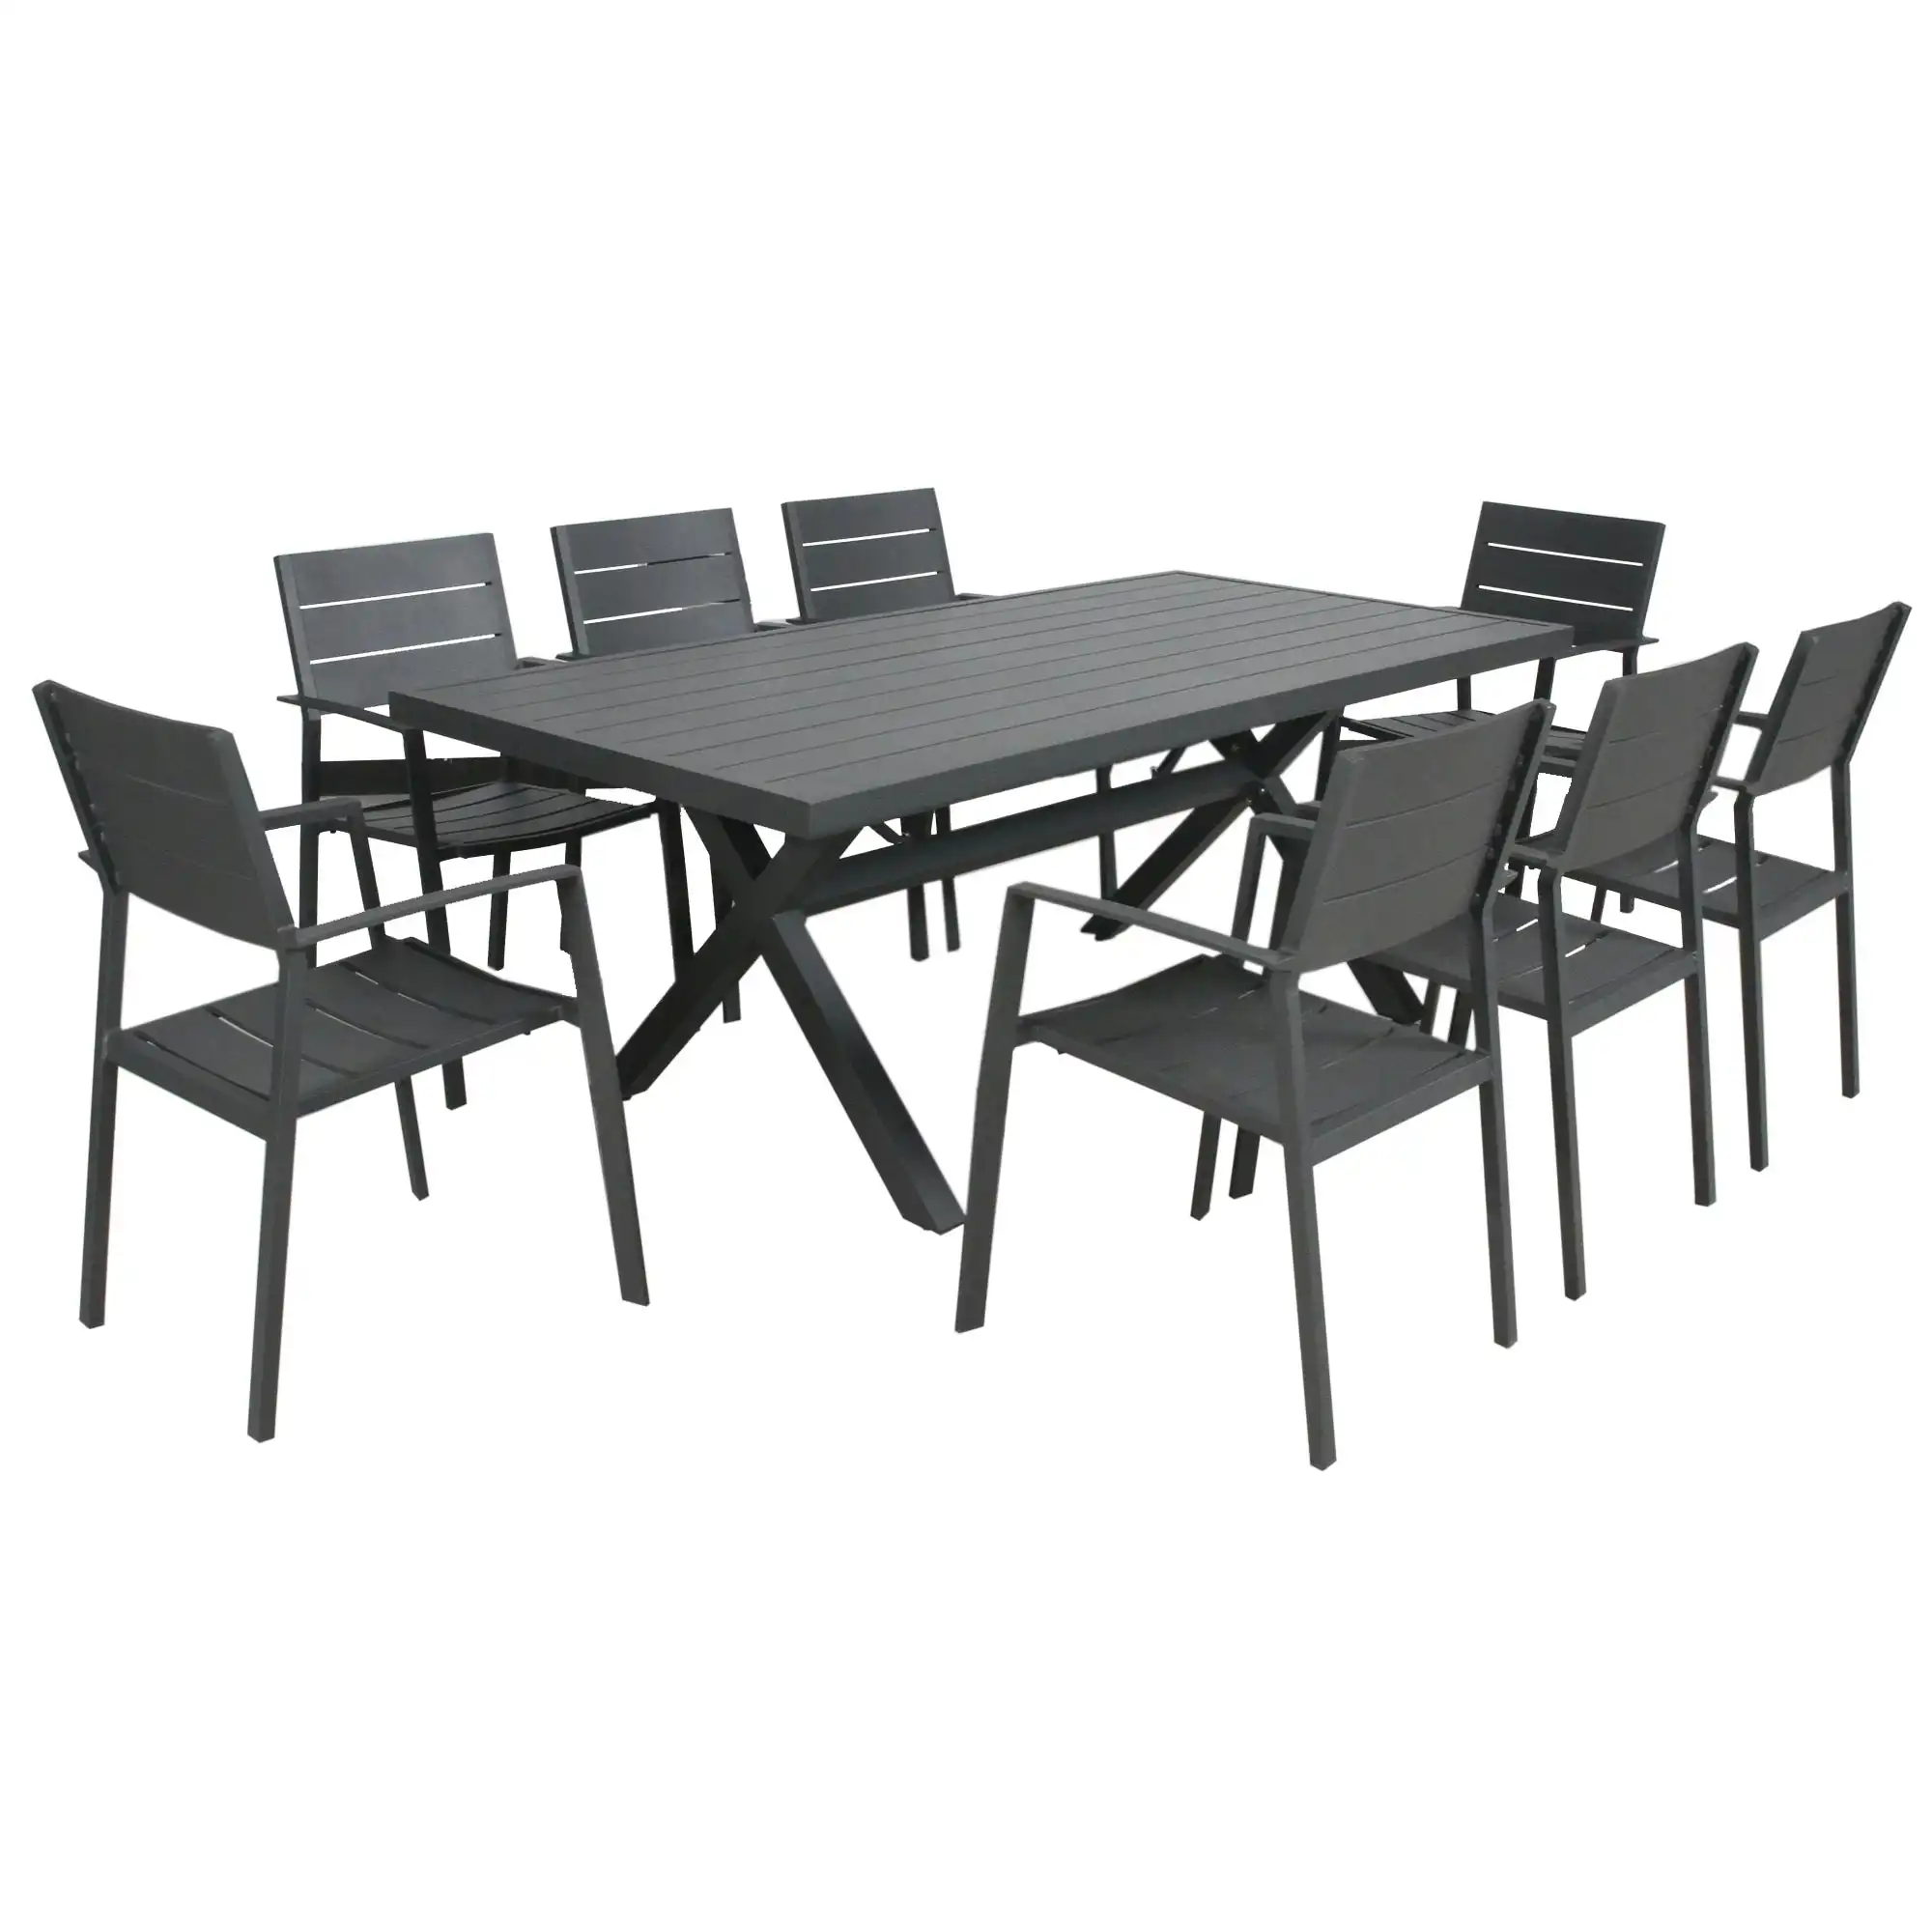 Percy 9pc Set 200cm Outdoor Dining Table Chair